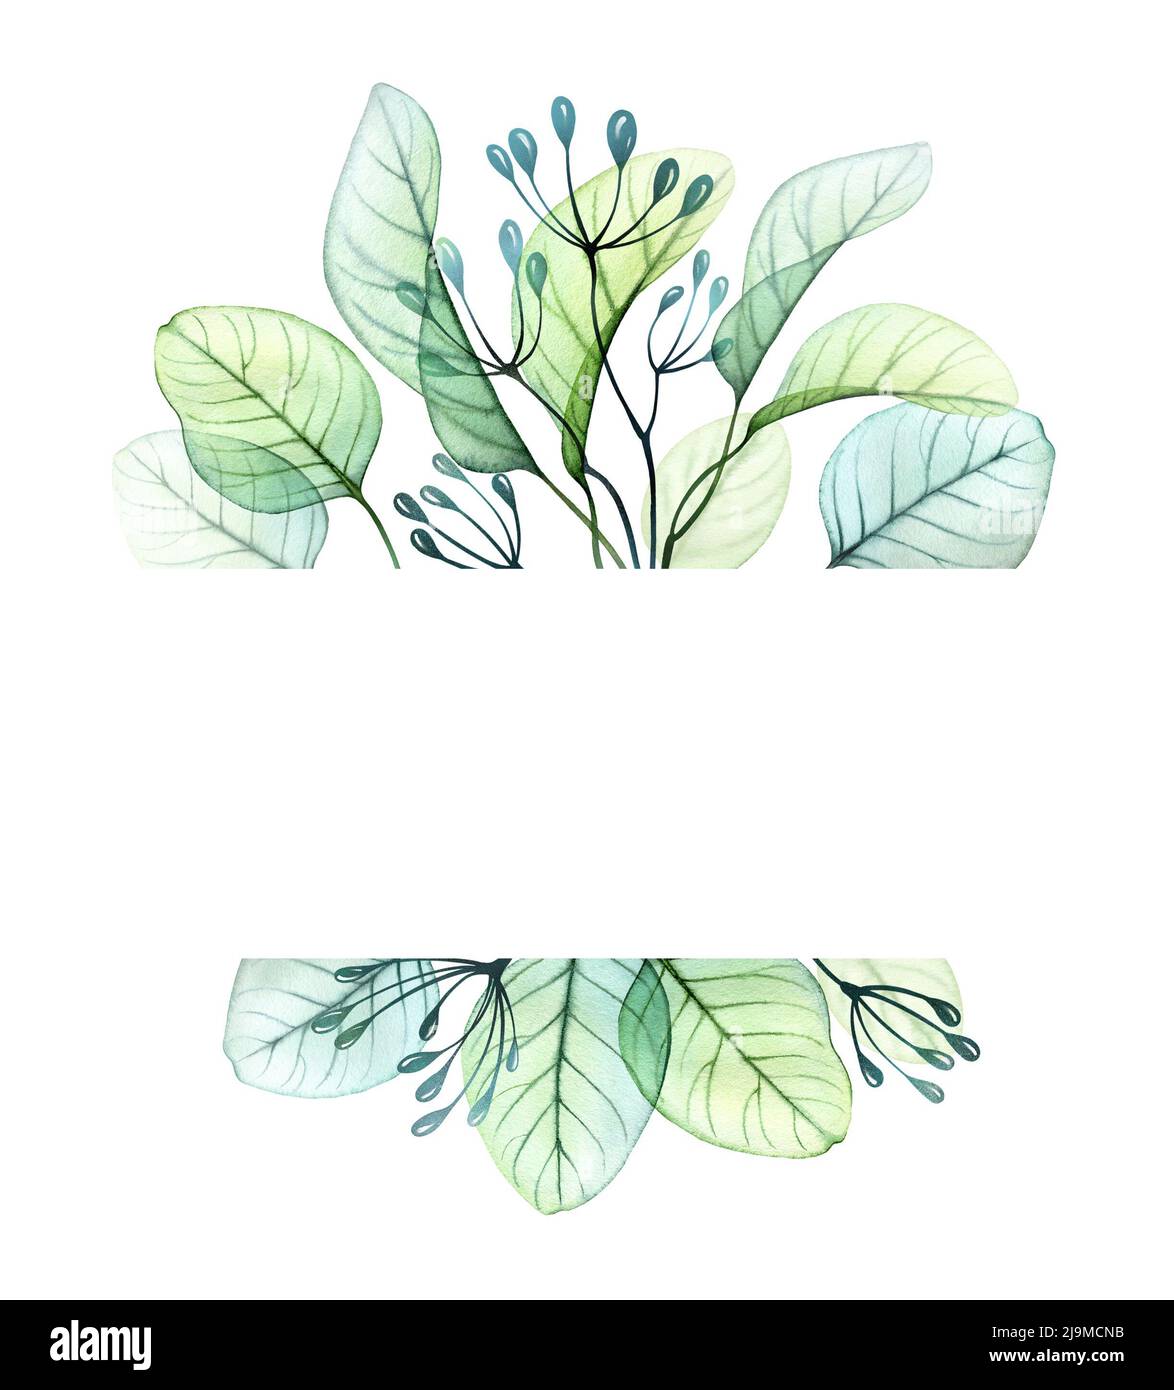 Watercolor banner template with eucalyptus leaves. Rectangular frame with transparent fresh greenery. Place for text and logo. Botanical floral Stock Photo